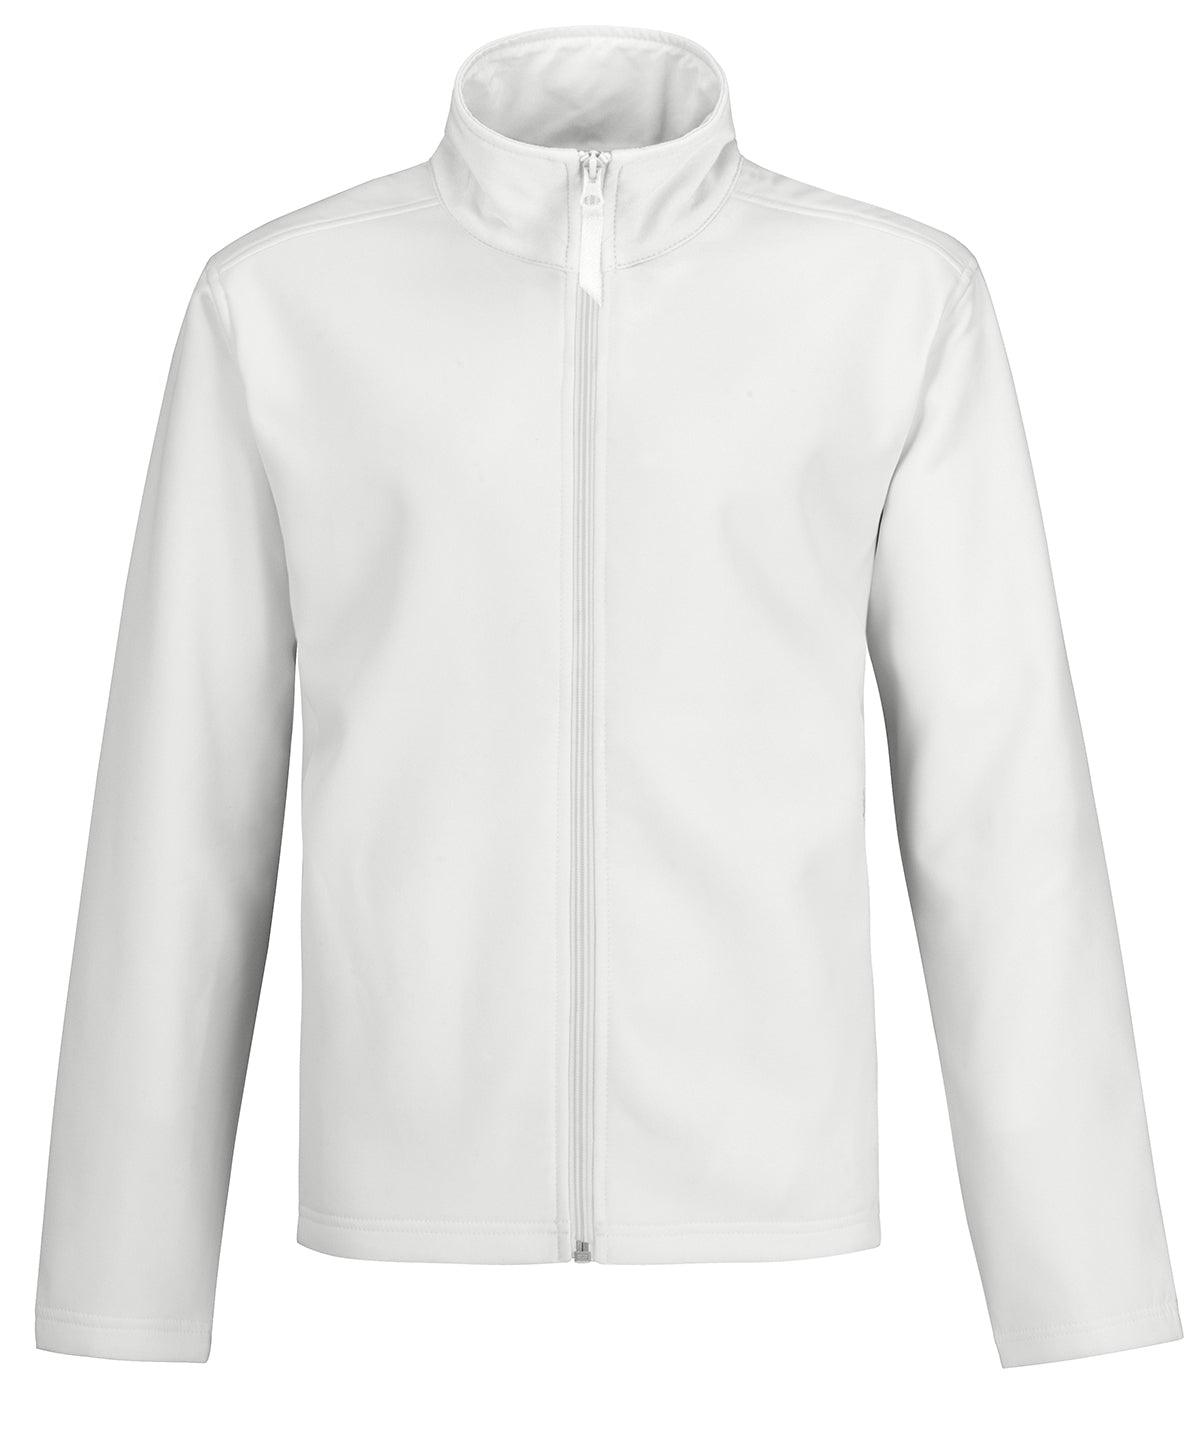 White/White Lining - B&C ID.701 Softshell jacket /men Jackets B&C Collection Hyperbrights and Neons, Jackets & Coats, Must Haves, Plus Sizes, Softshells, Workwear Schoolwear Centres